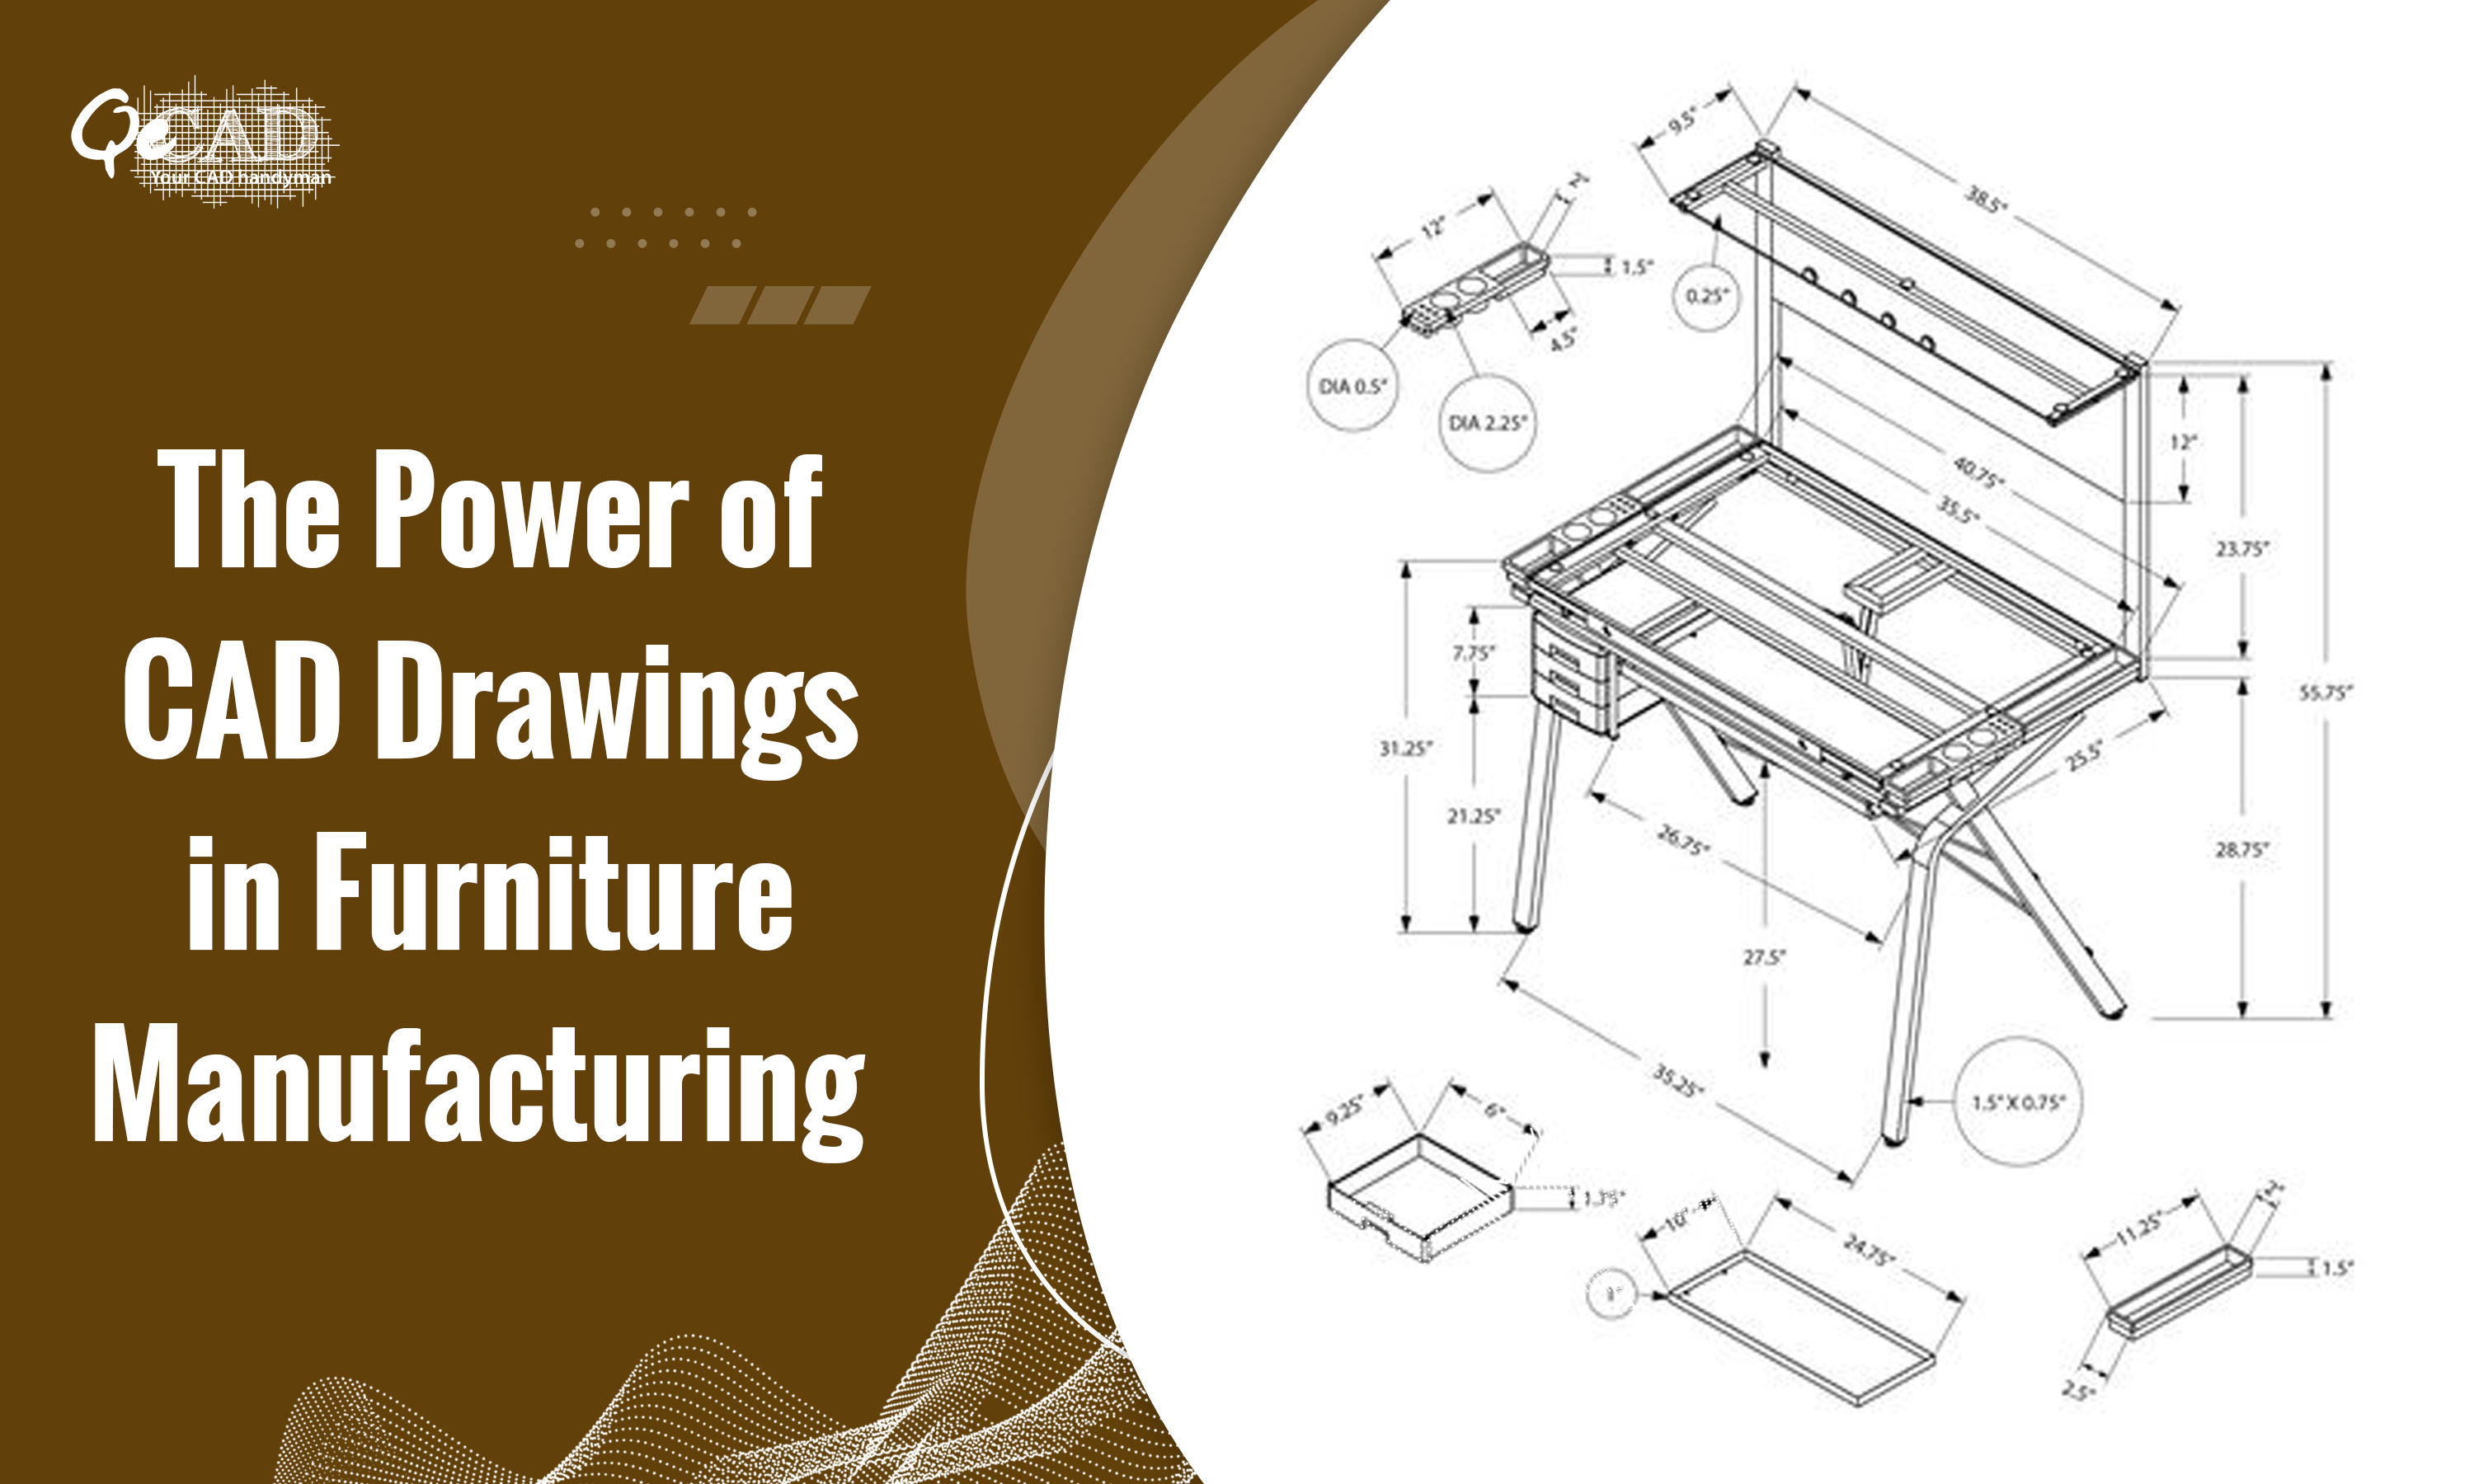 The Power of CAD Drawings in Furniture Manufacturing